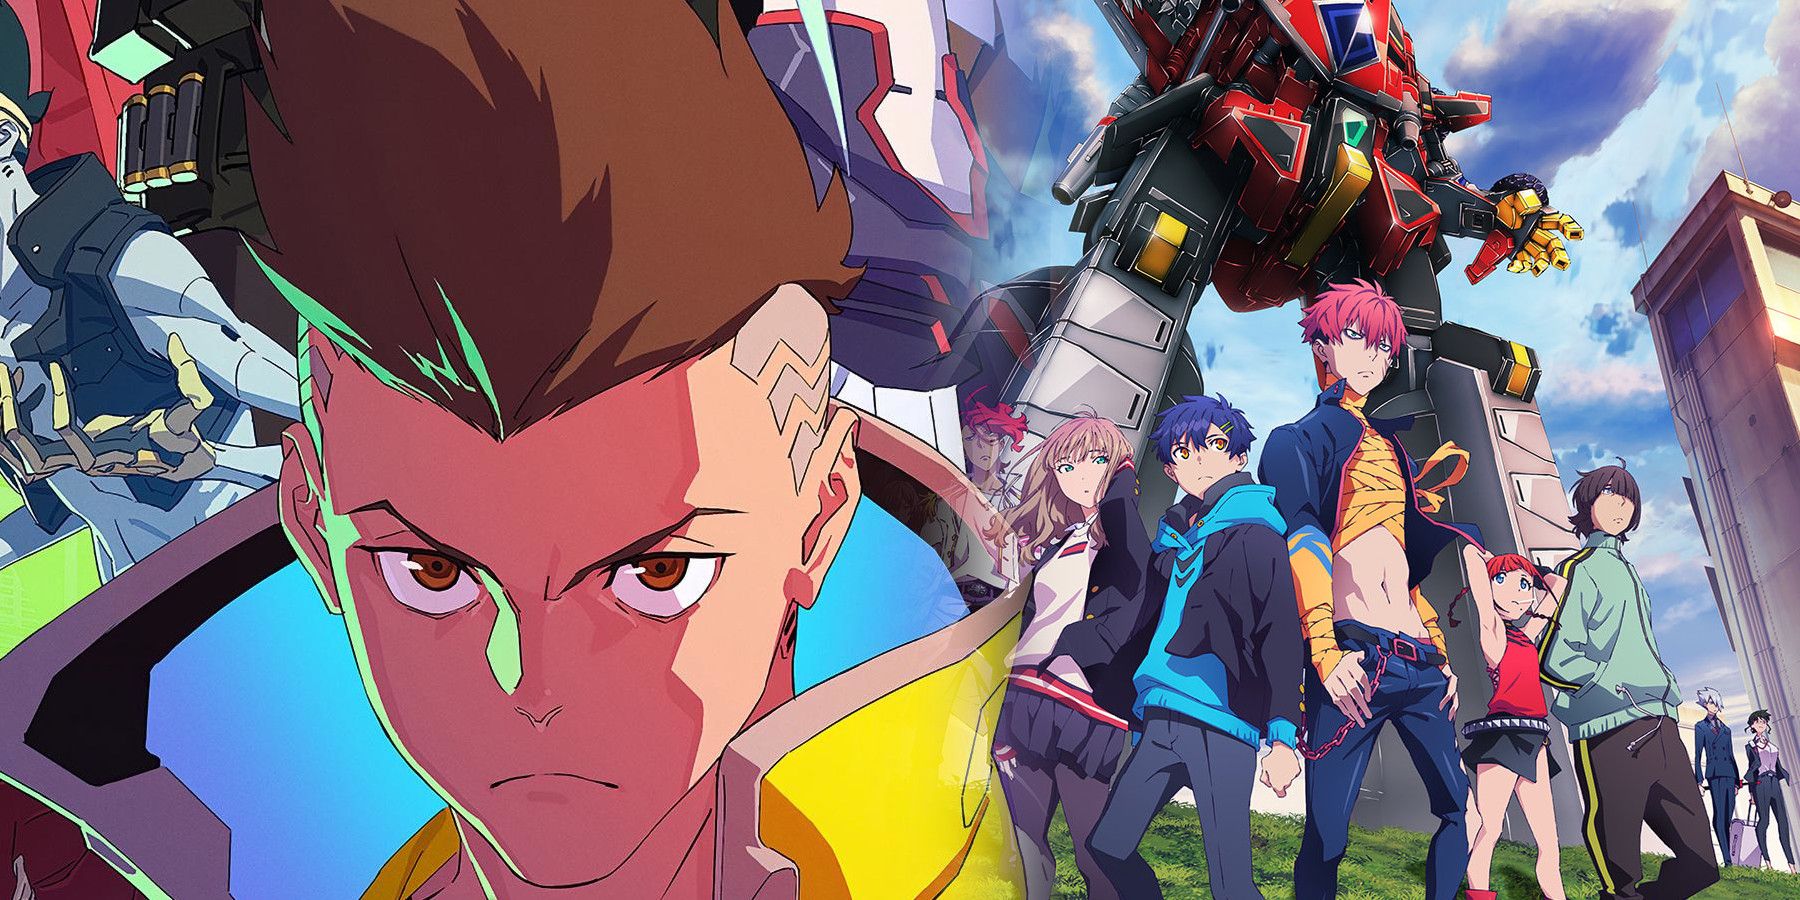 Trigger's BNA and PROMARE Cross Over in New Visual